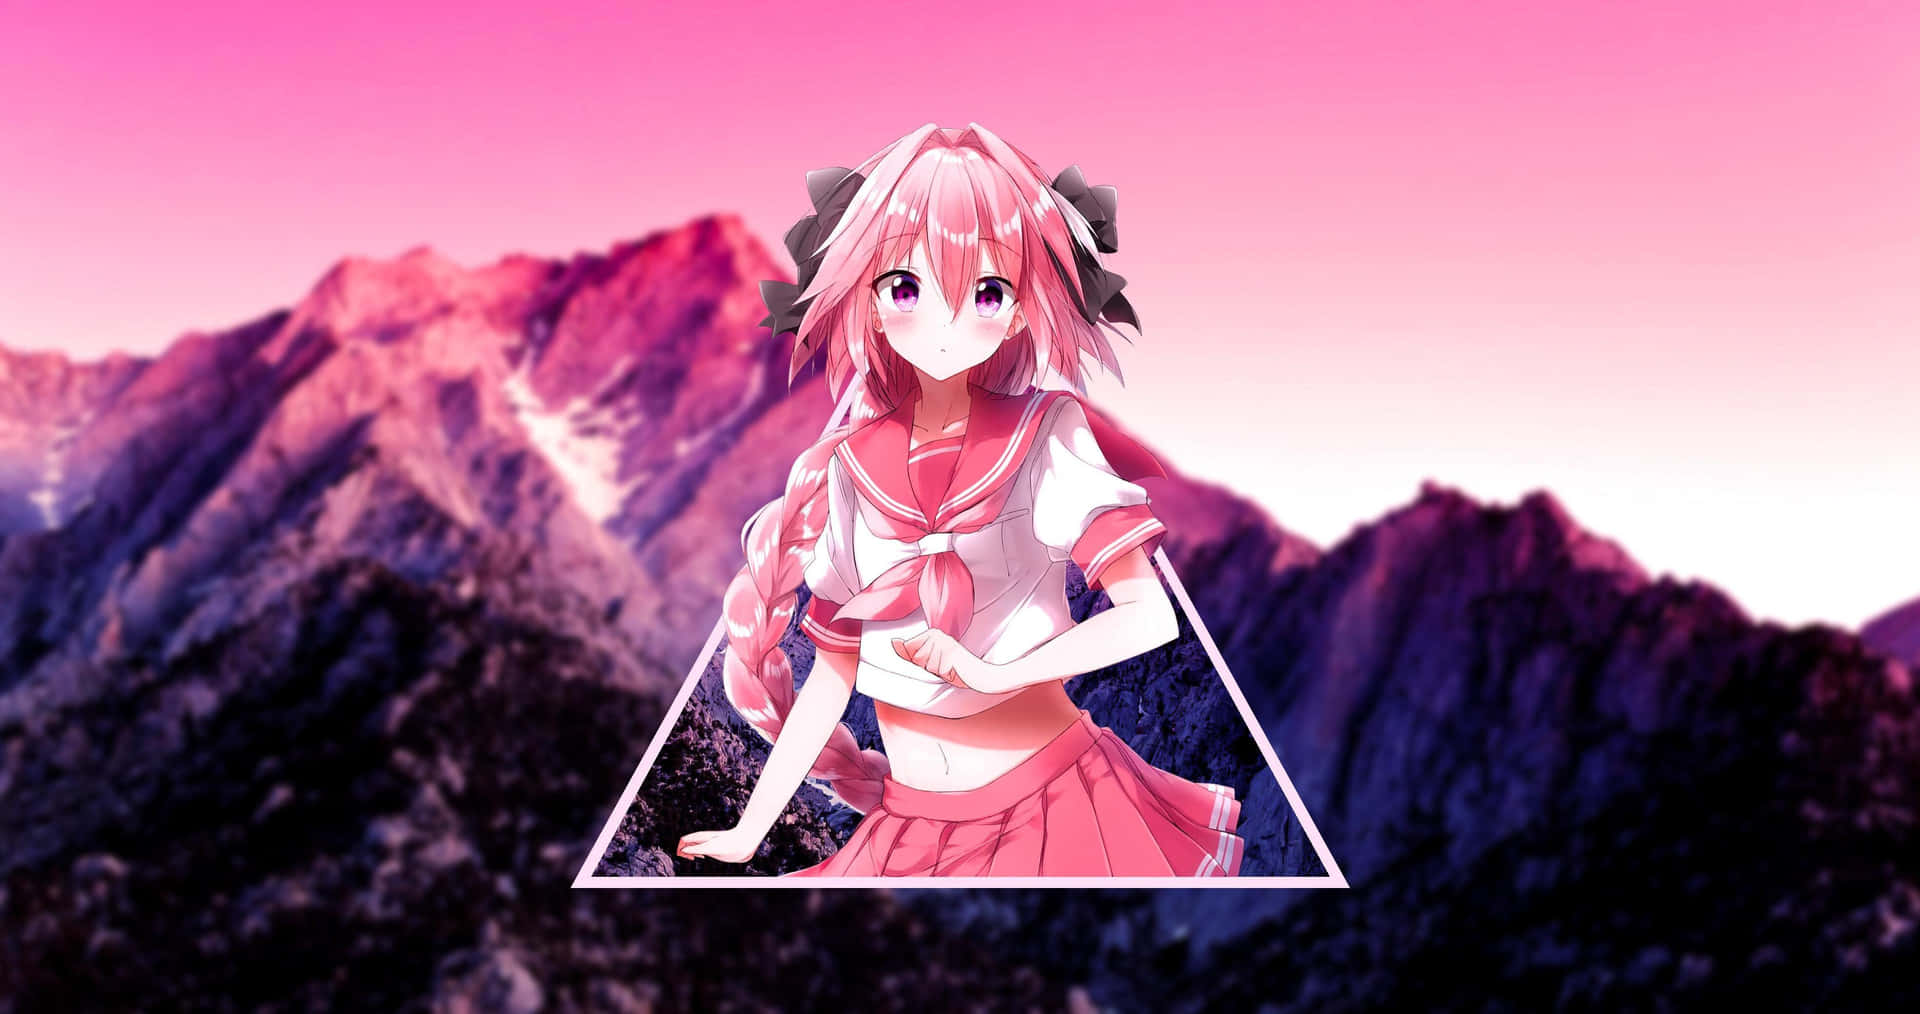 "Dream of the impossible with Astolfo!"